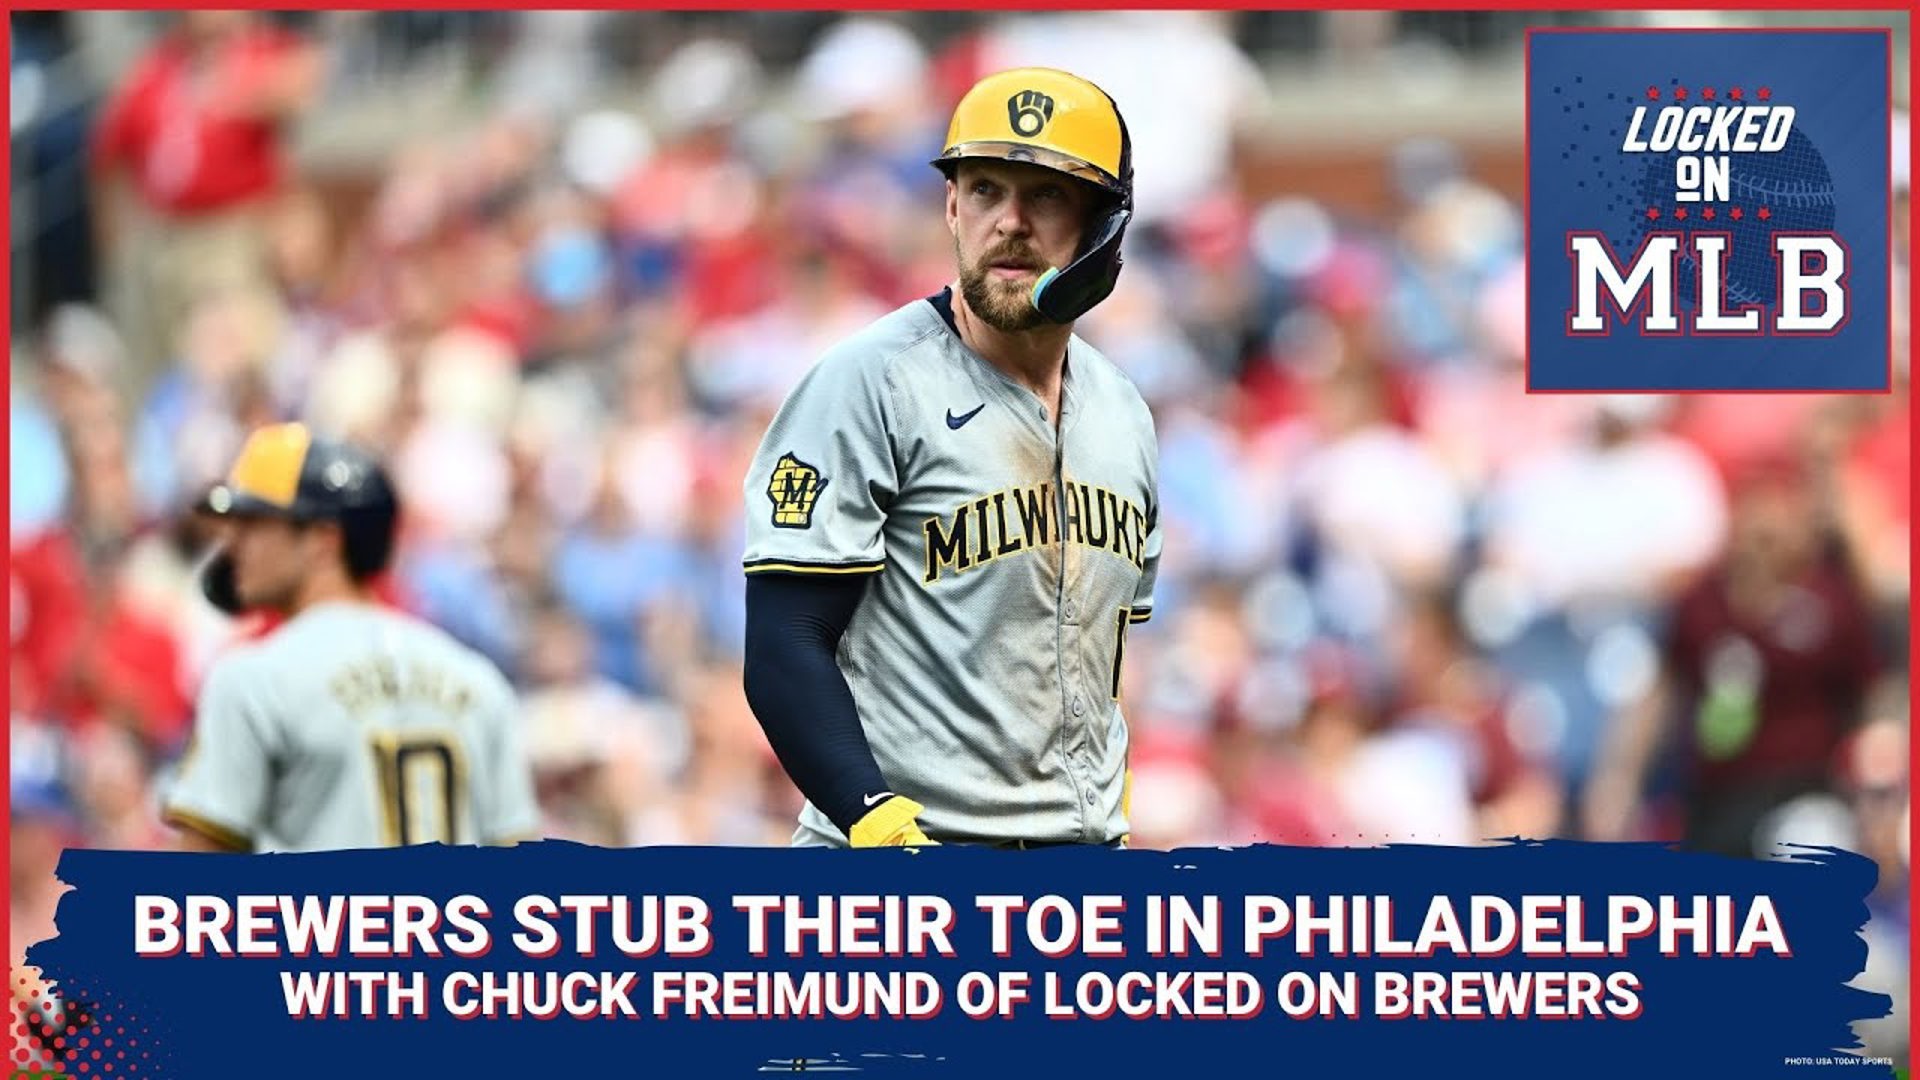 The Brewers got swept by Philadelphia as their bats could only score a total of 2 runs in the 3 game series.